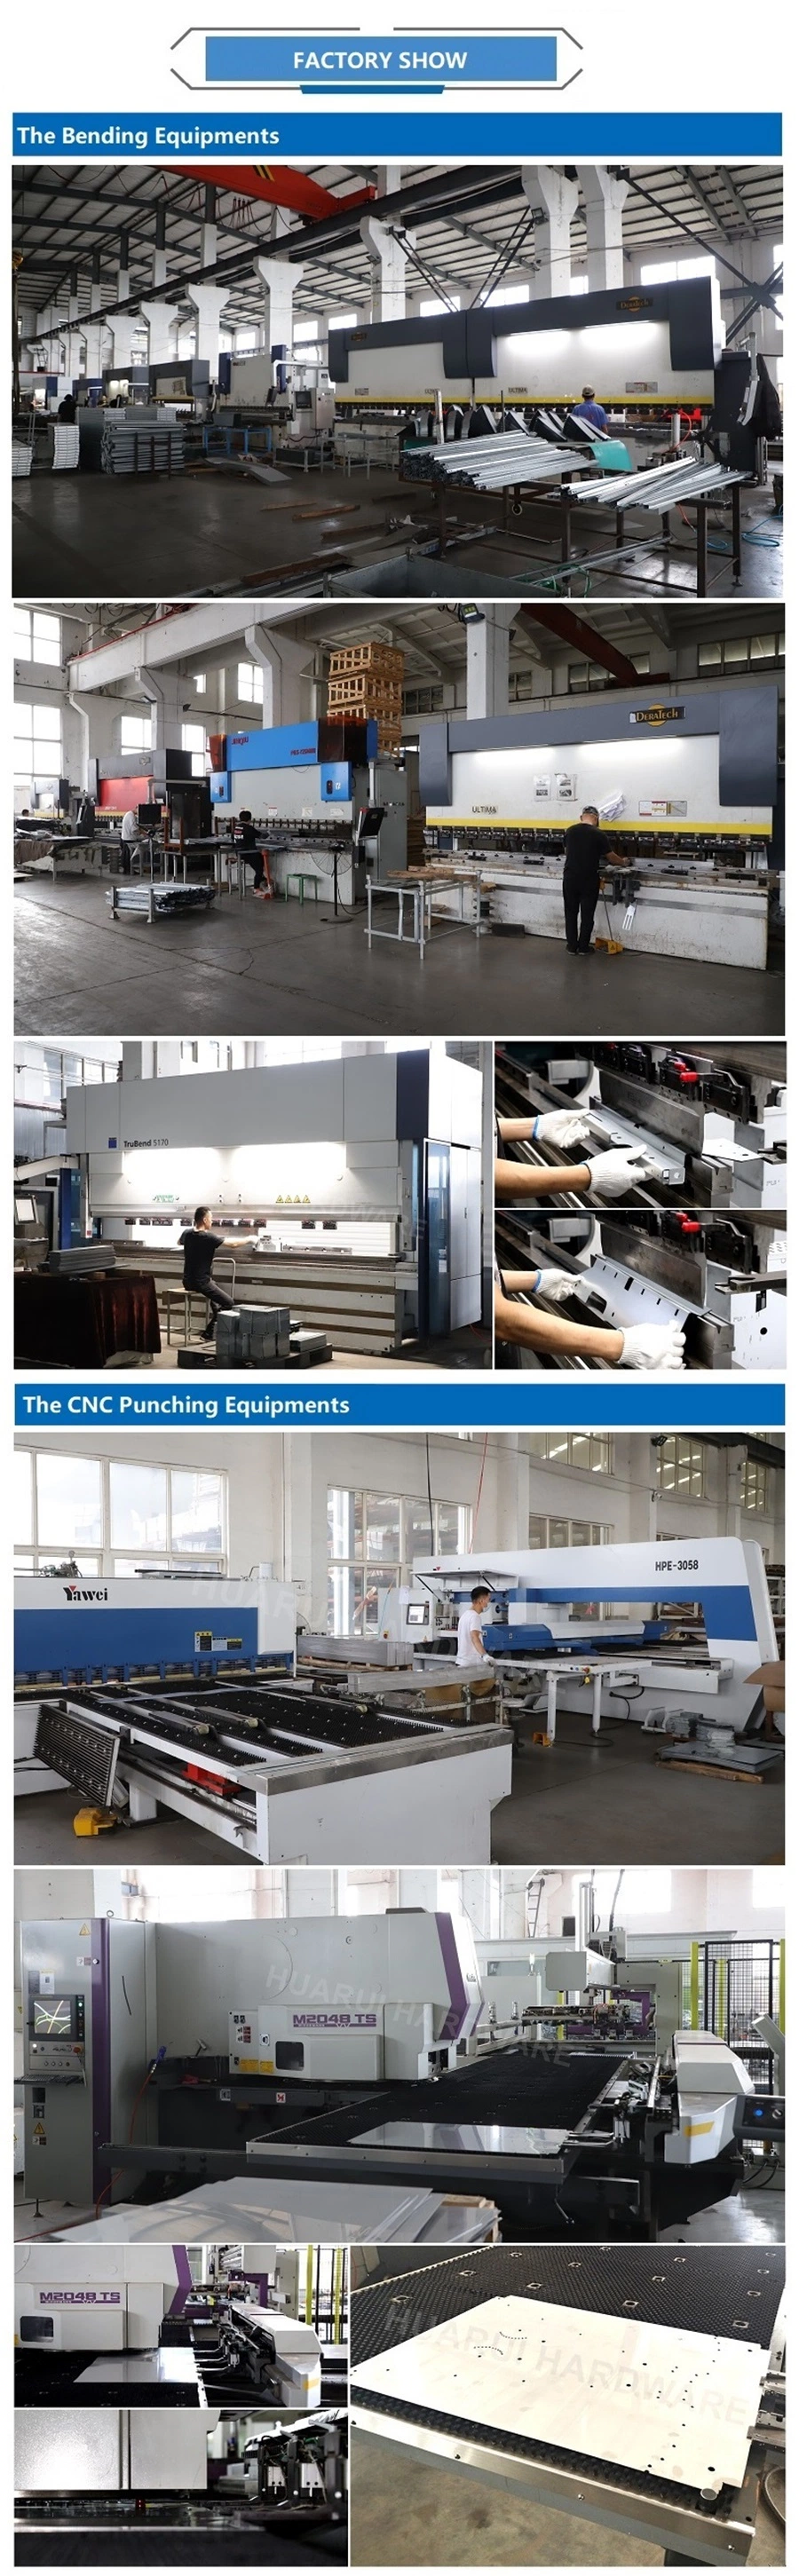 High Precision OEM/ODM Sheet Metal Fabrication Services